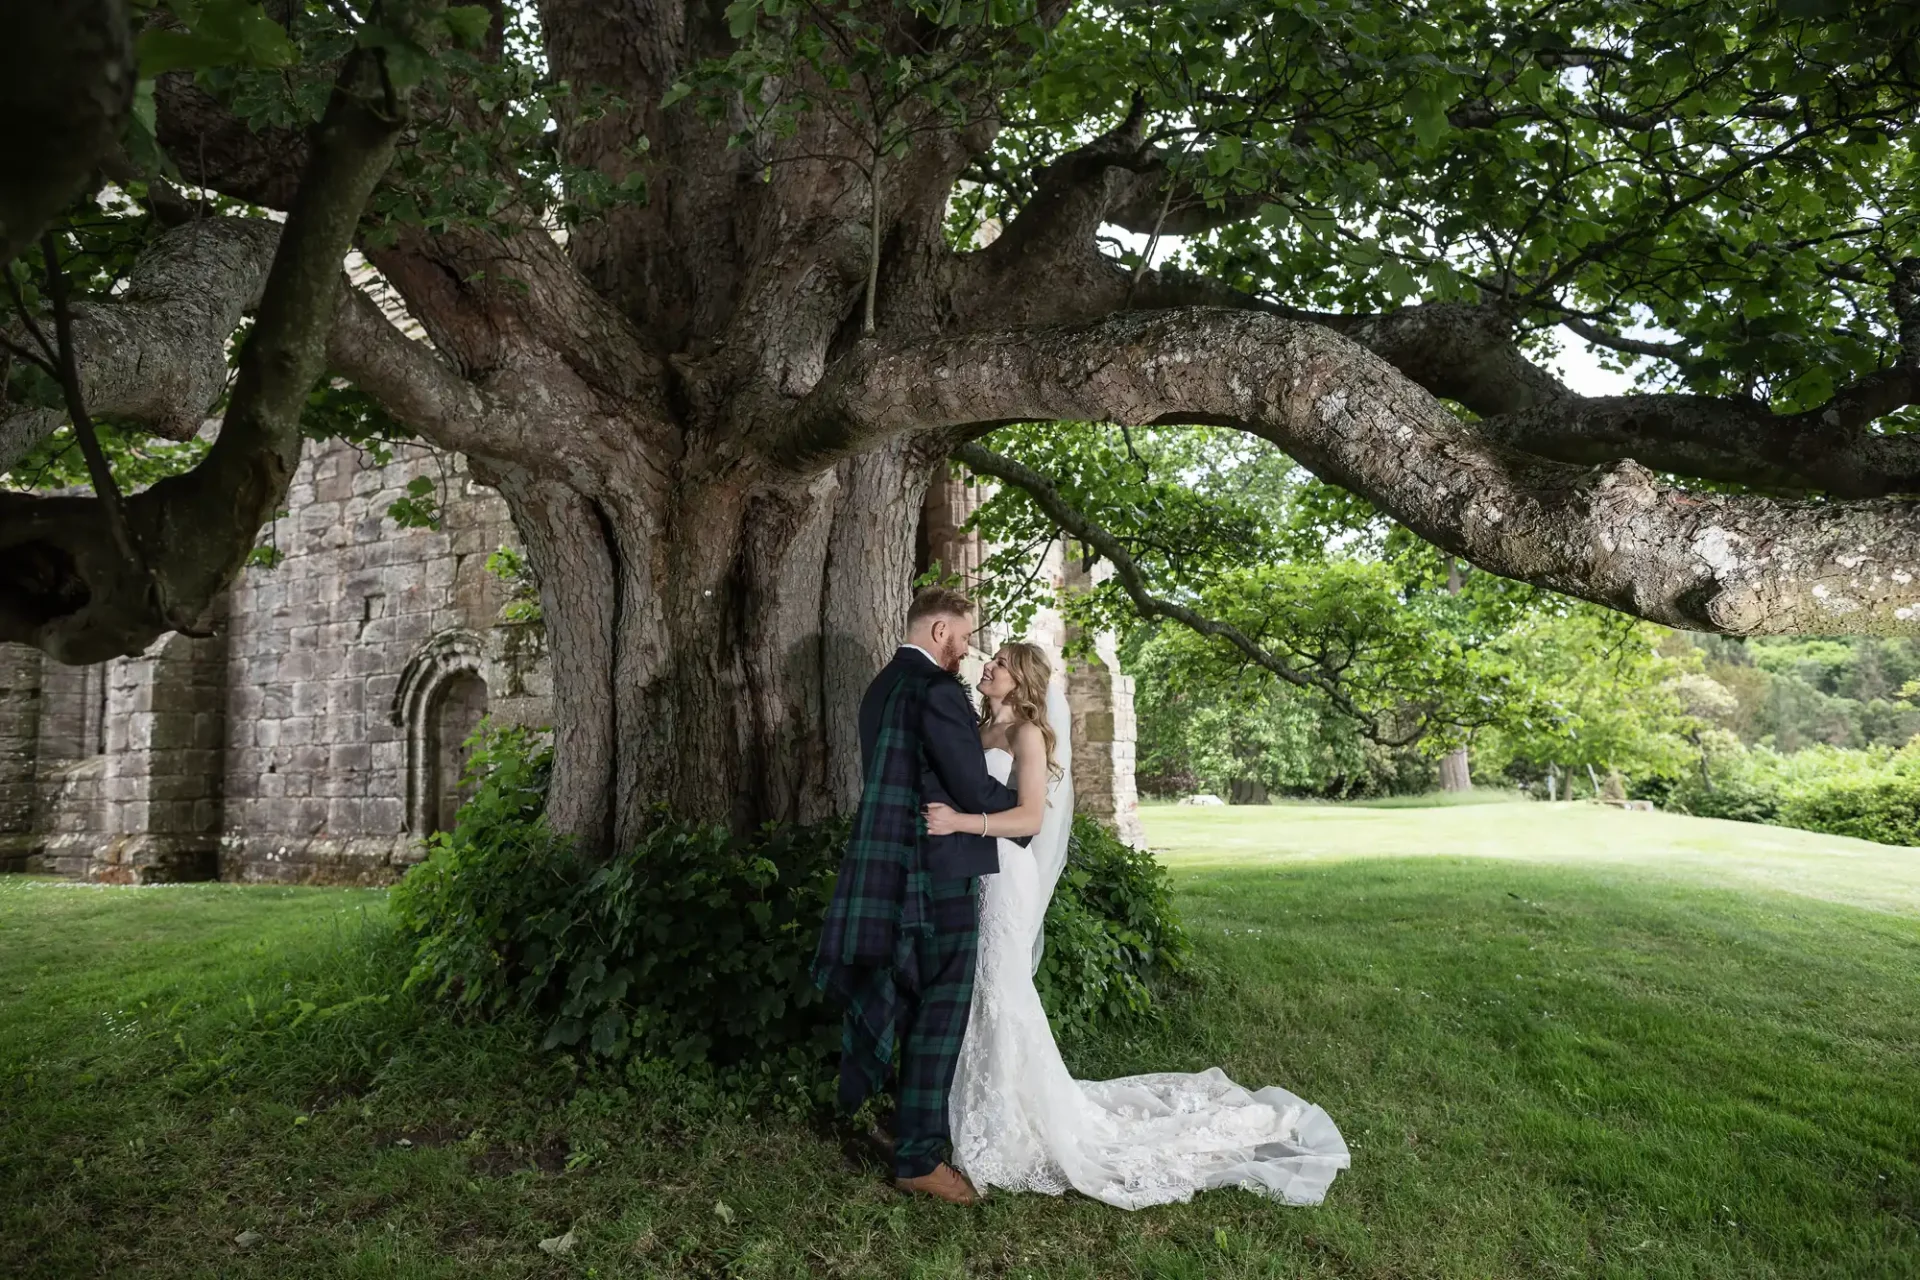 A bride and groom stand beneath an ancient tree, softly embracing, with an old stone building in the background.